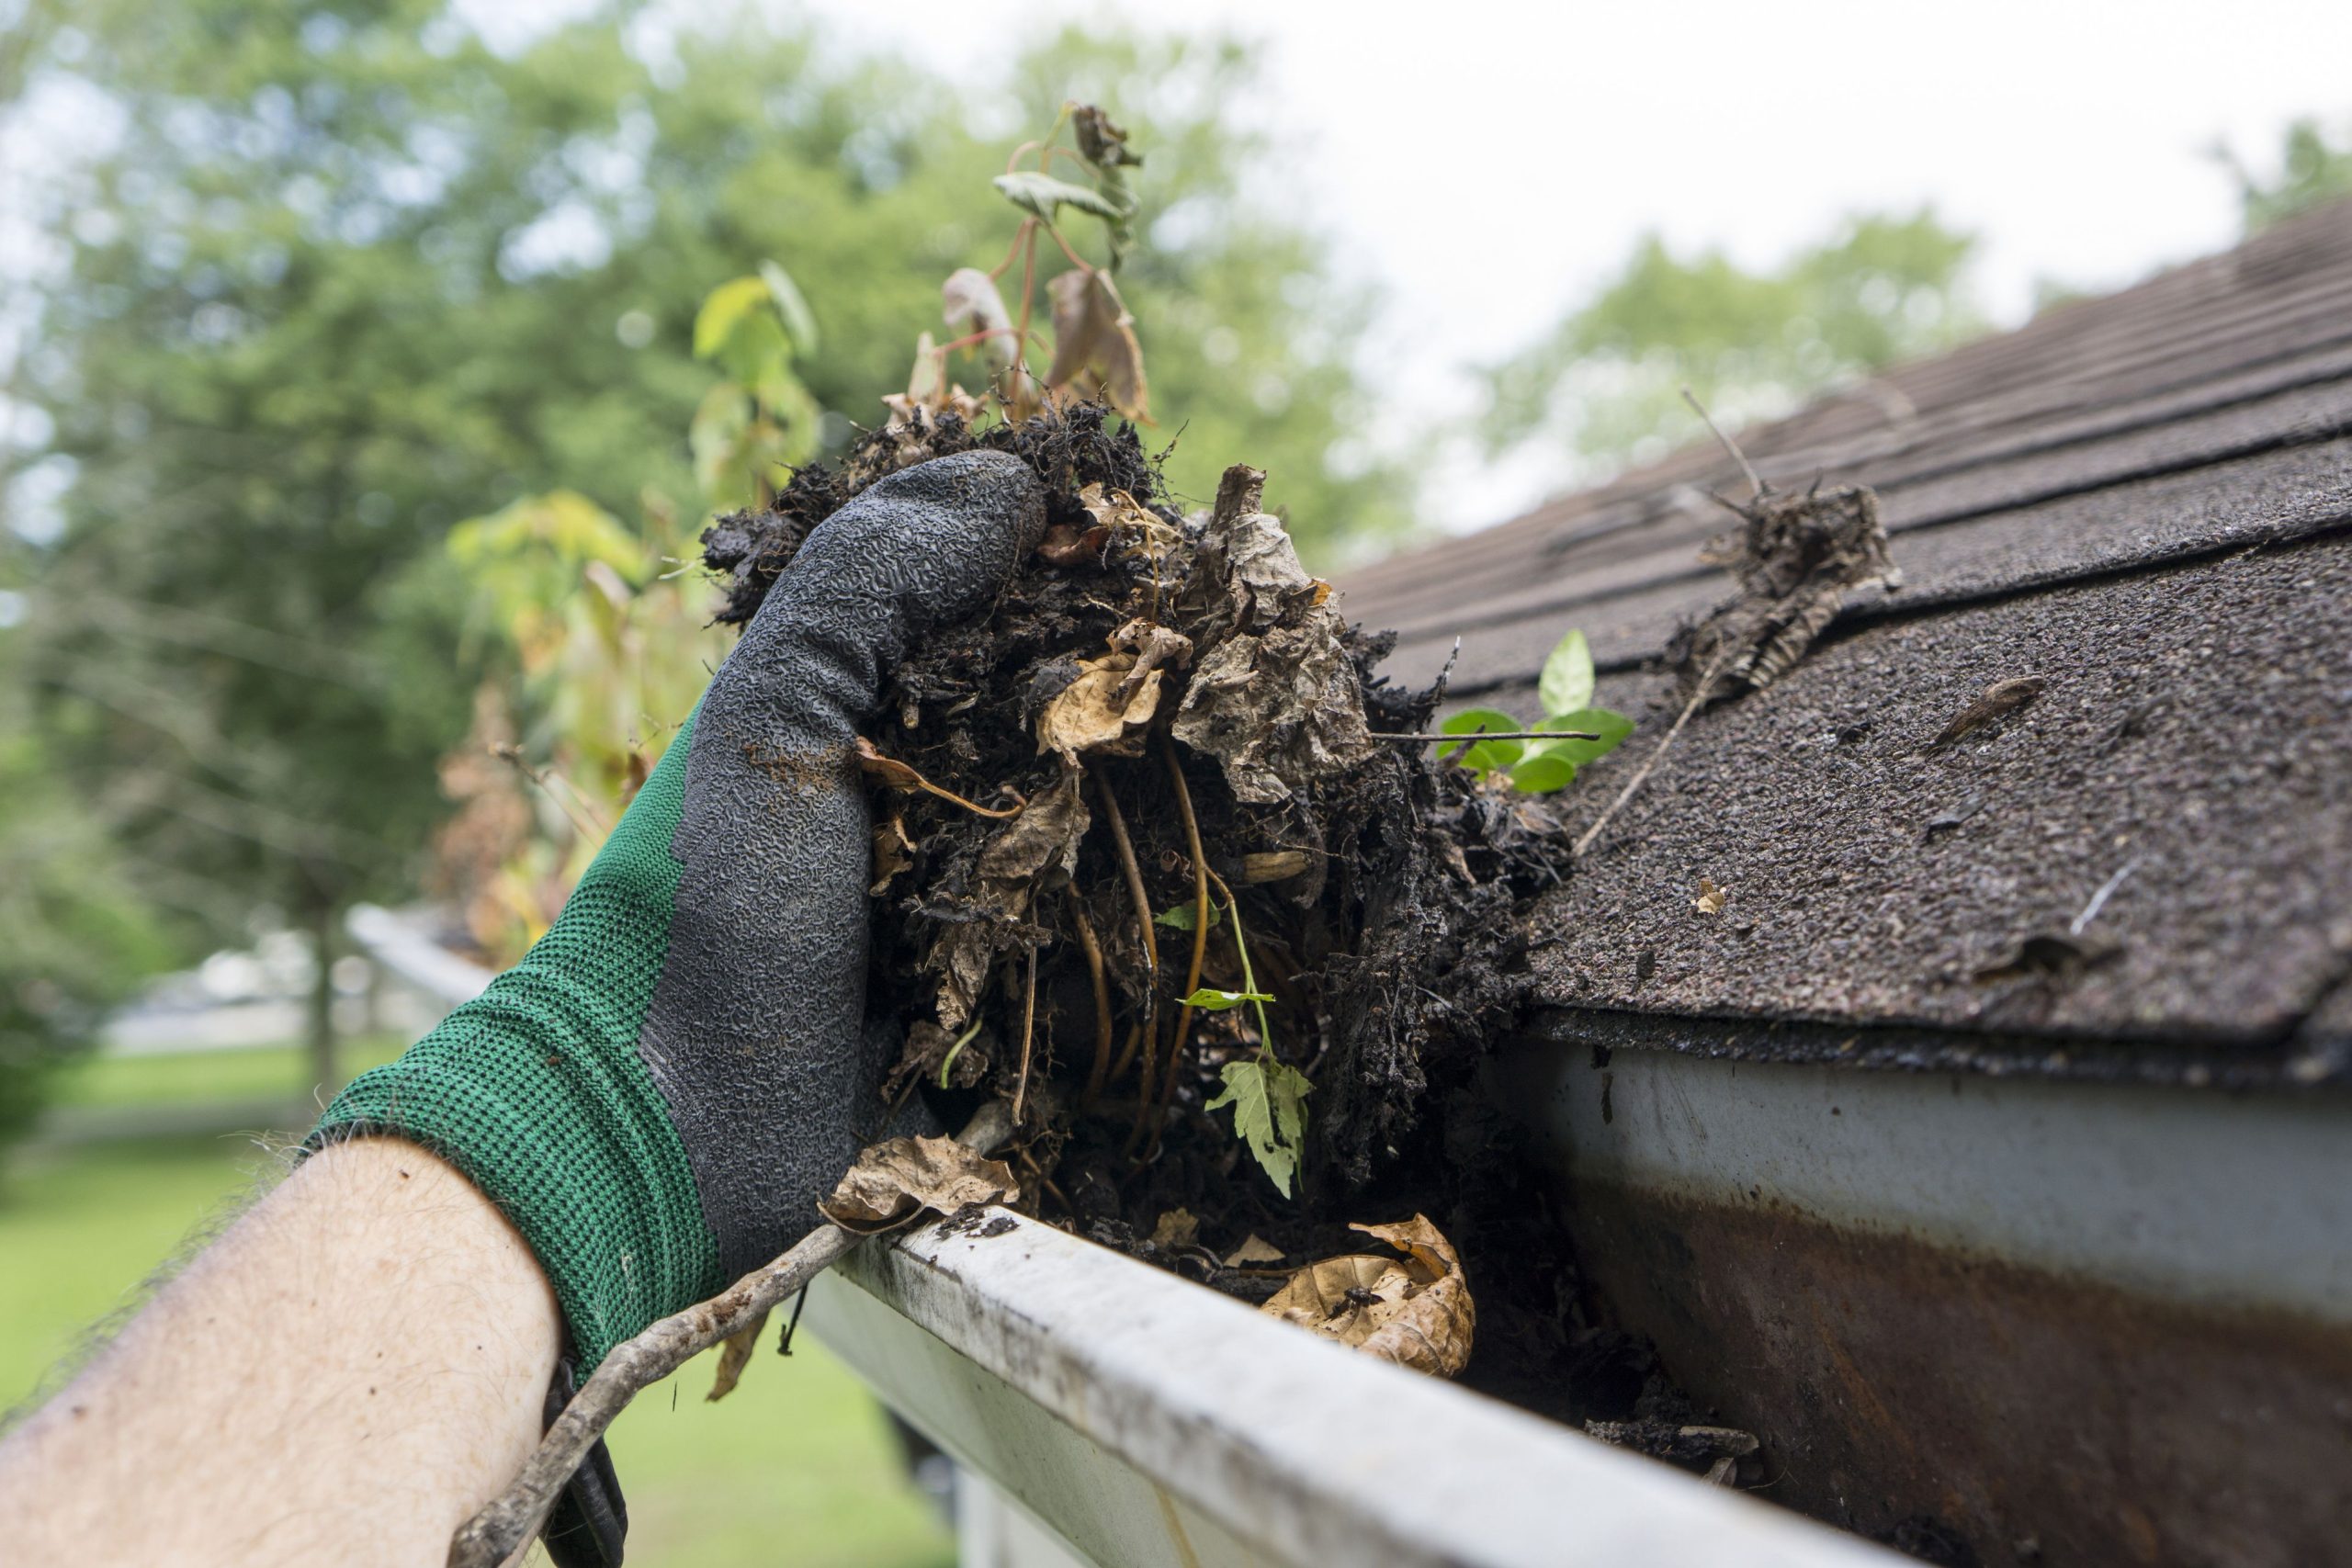 Gutter cleaning service and what you should look out for